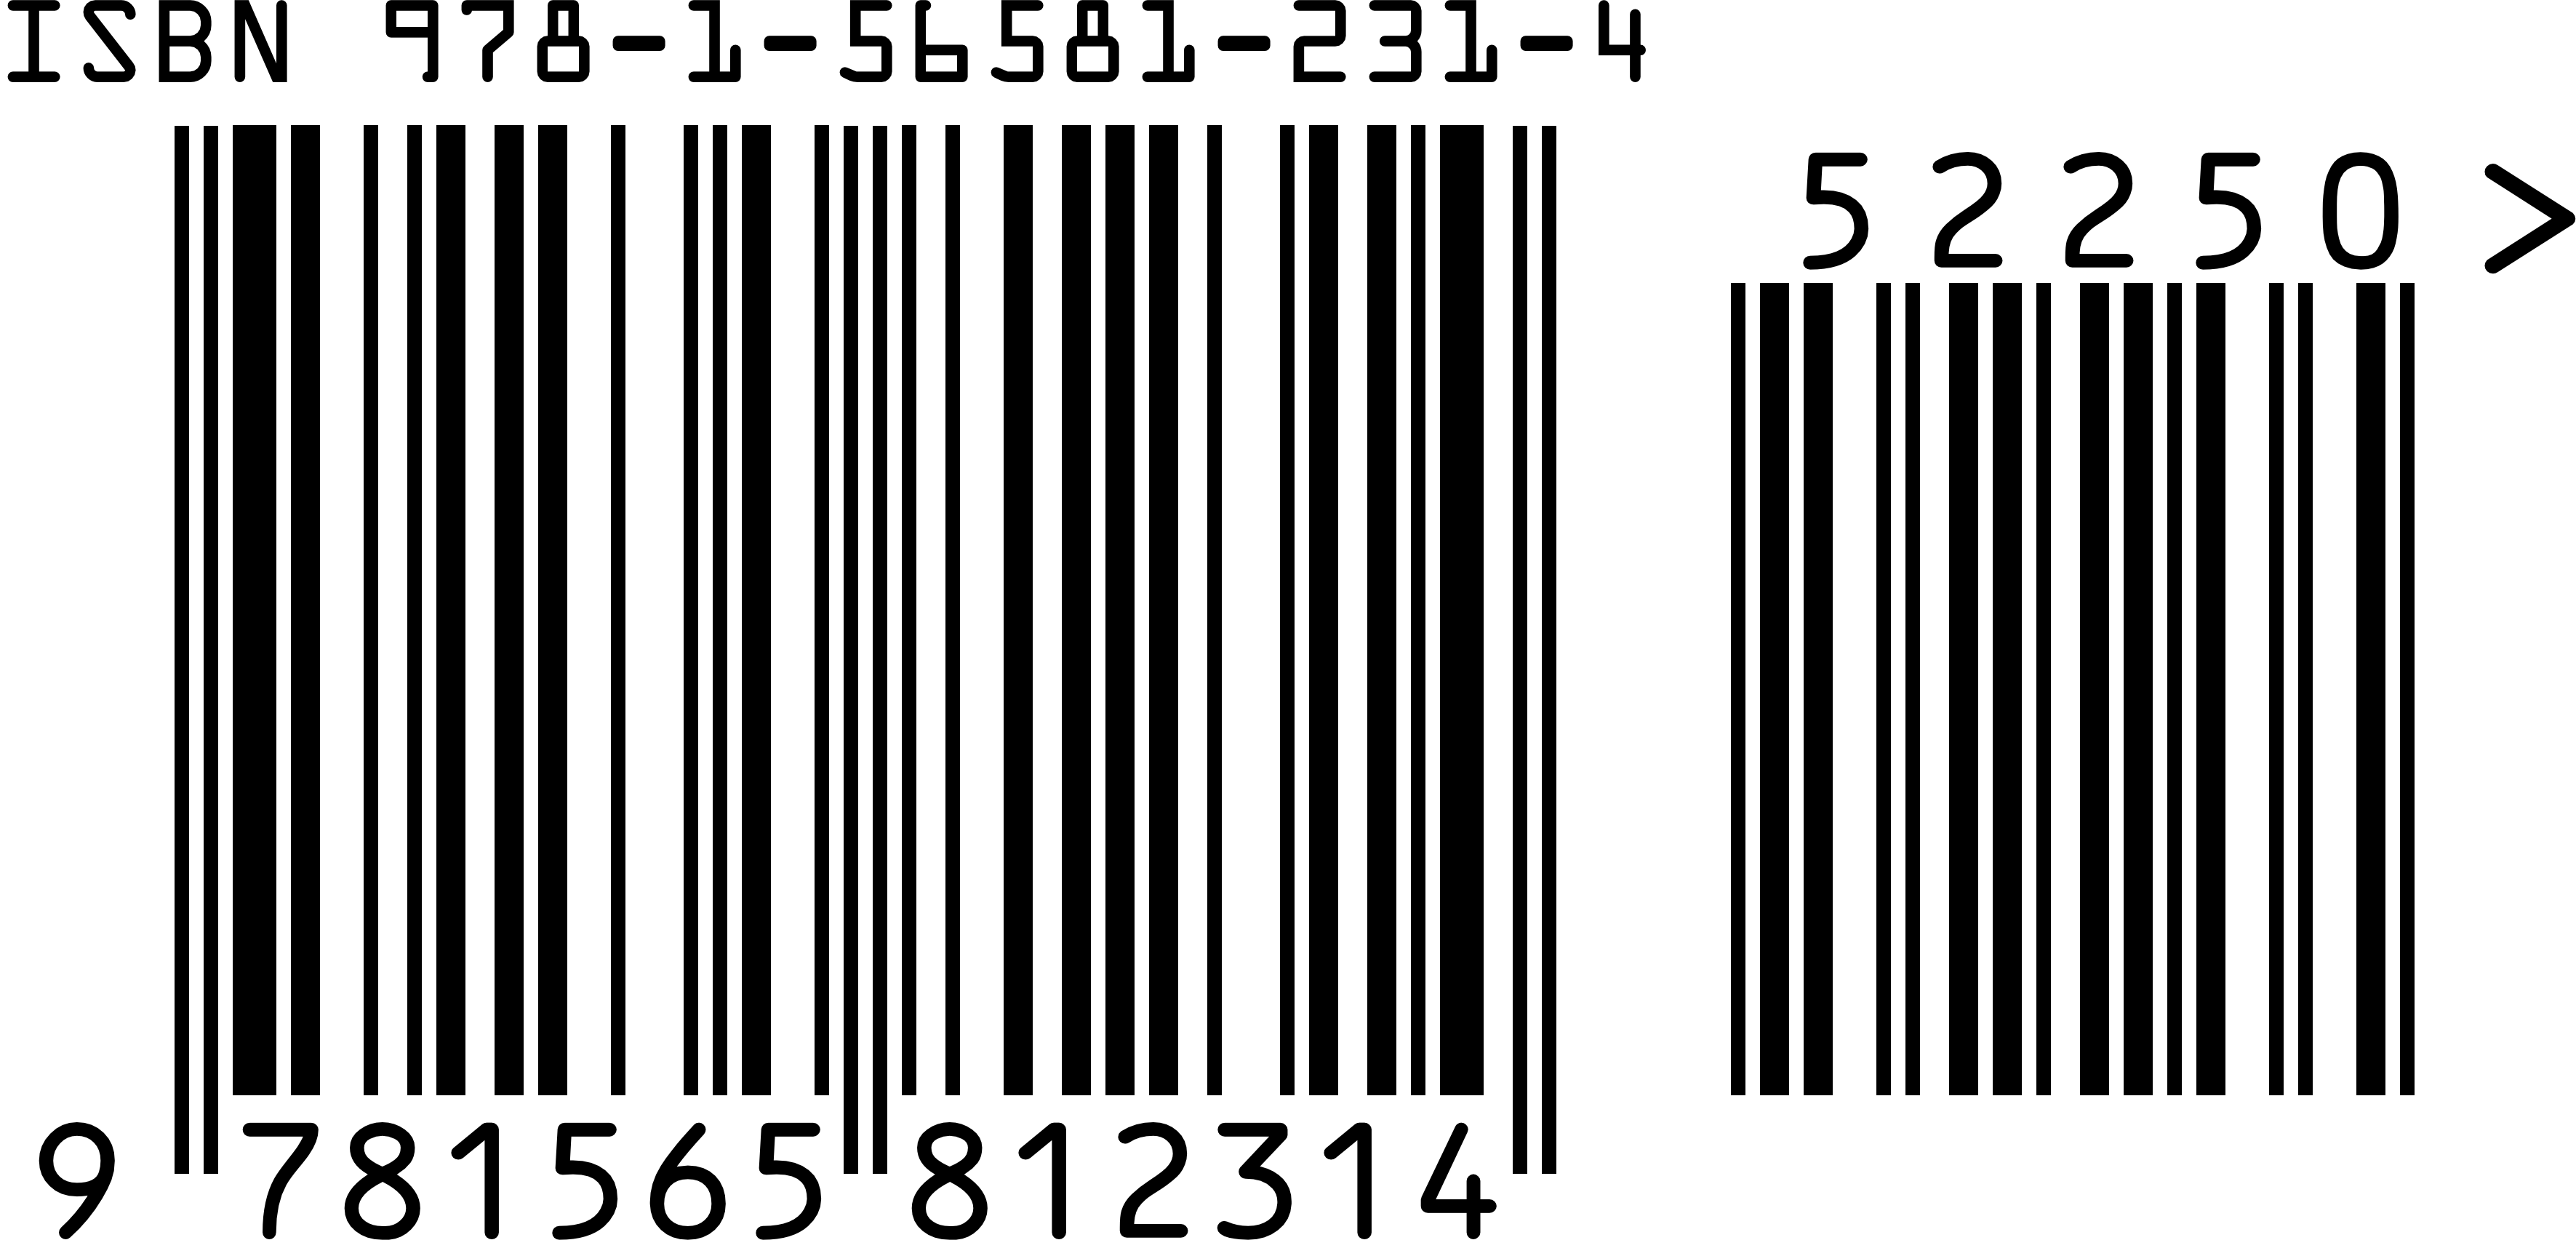 Example ISBN Barcode